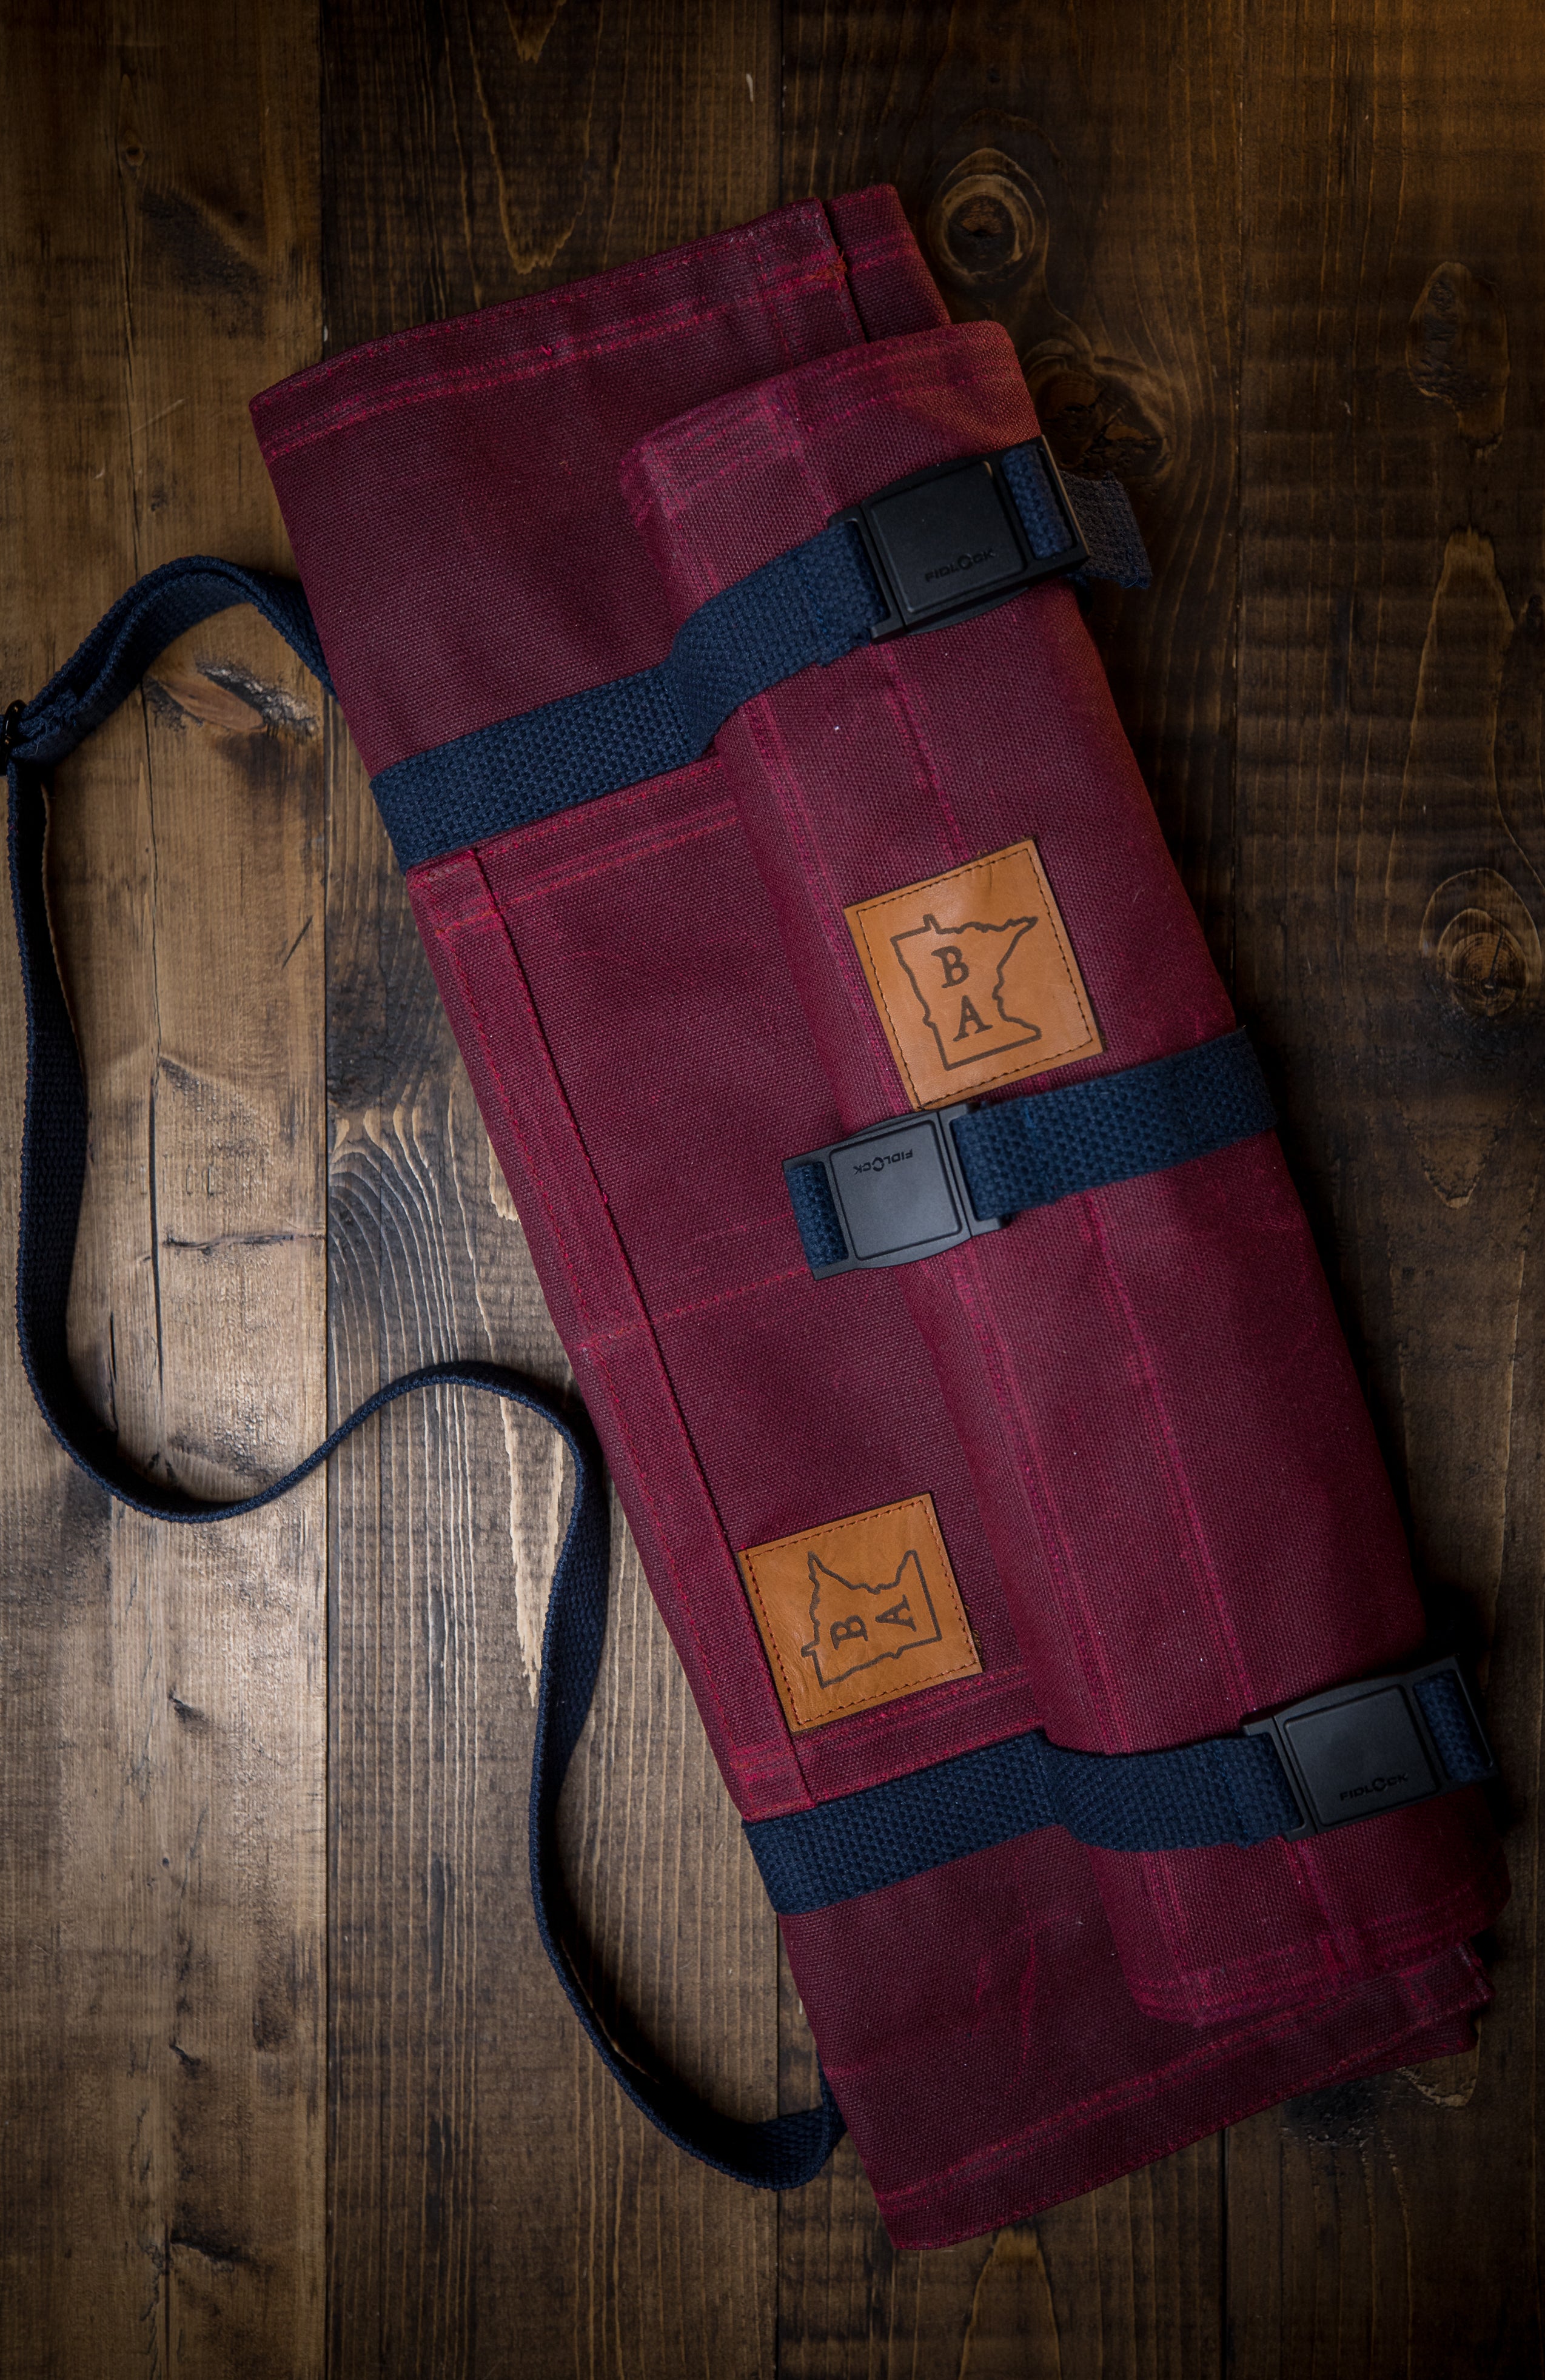 Burgundy Main Squeeze and Side Hustle set on a wooden surface. Designed and produced by Craftmade Aprons in Minnesota.